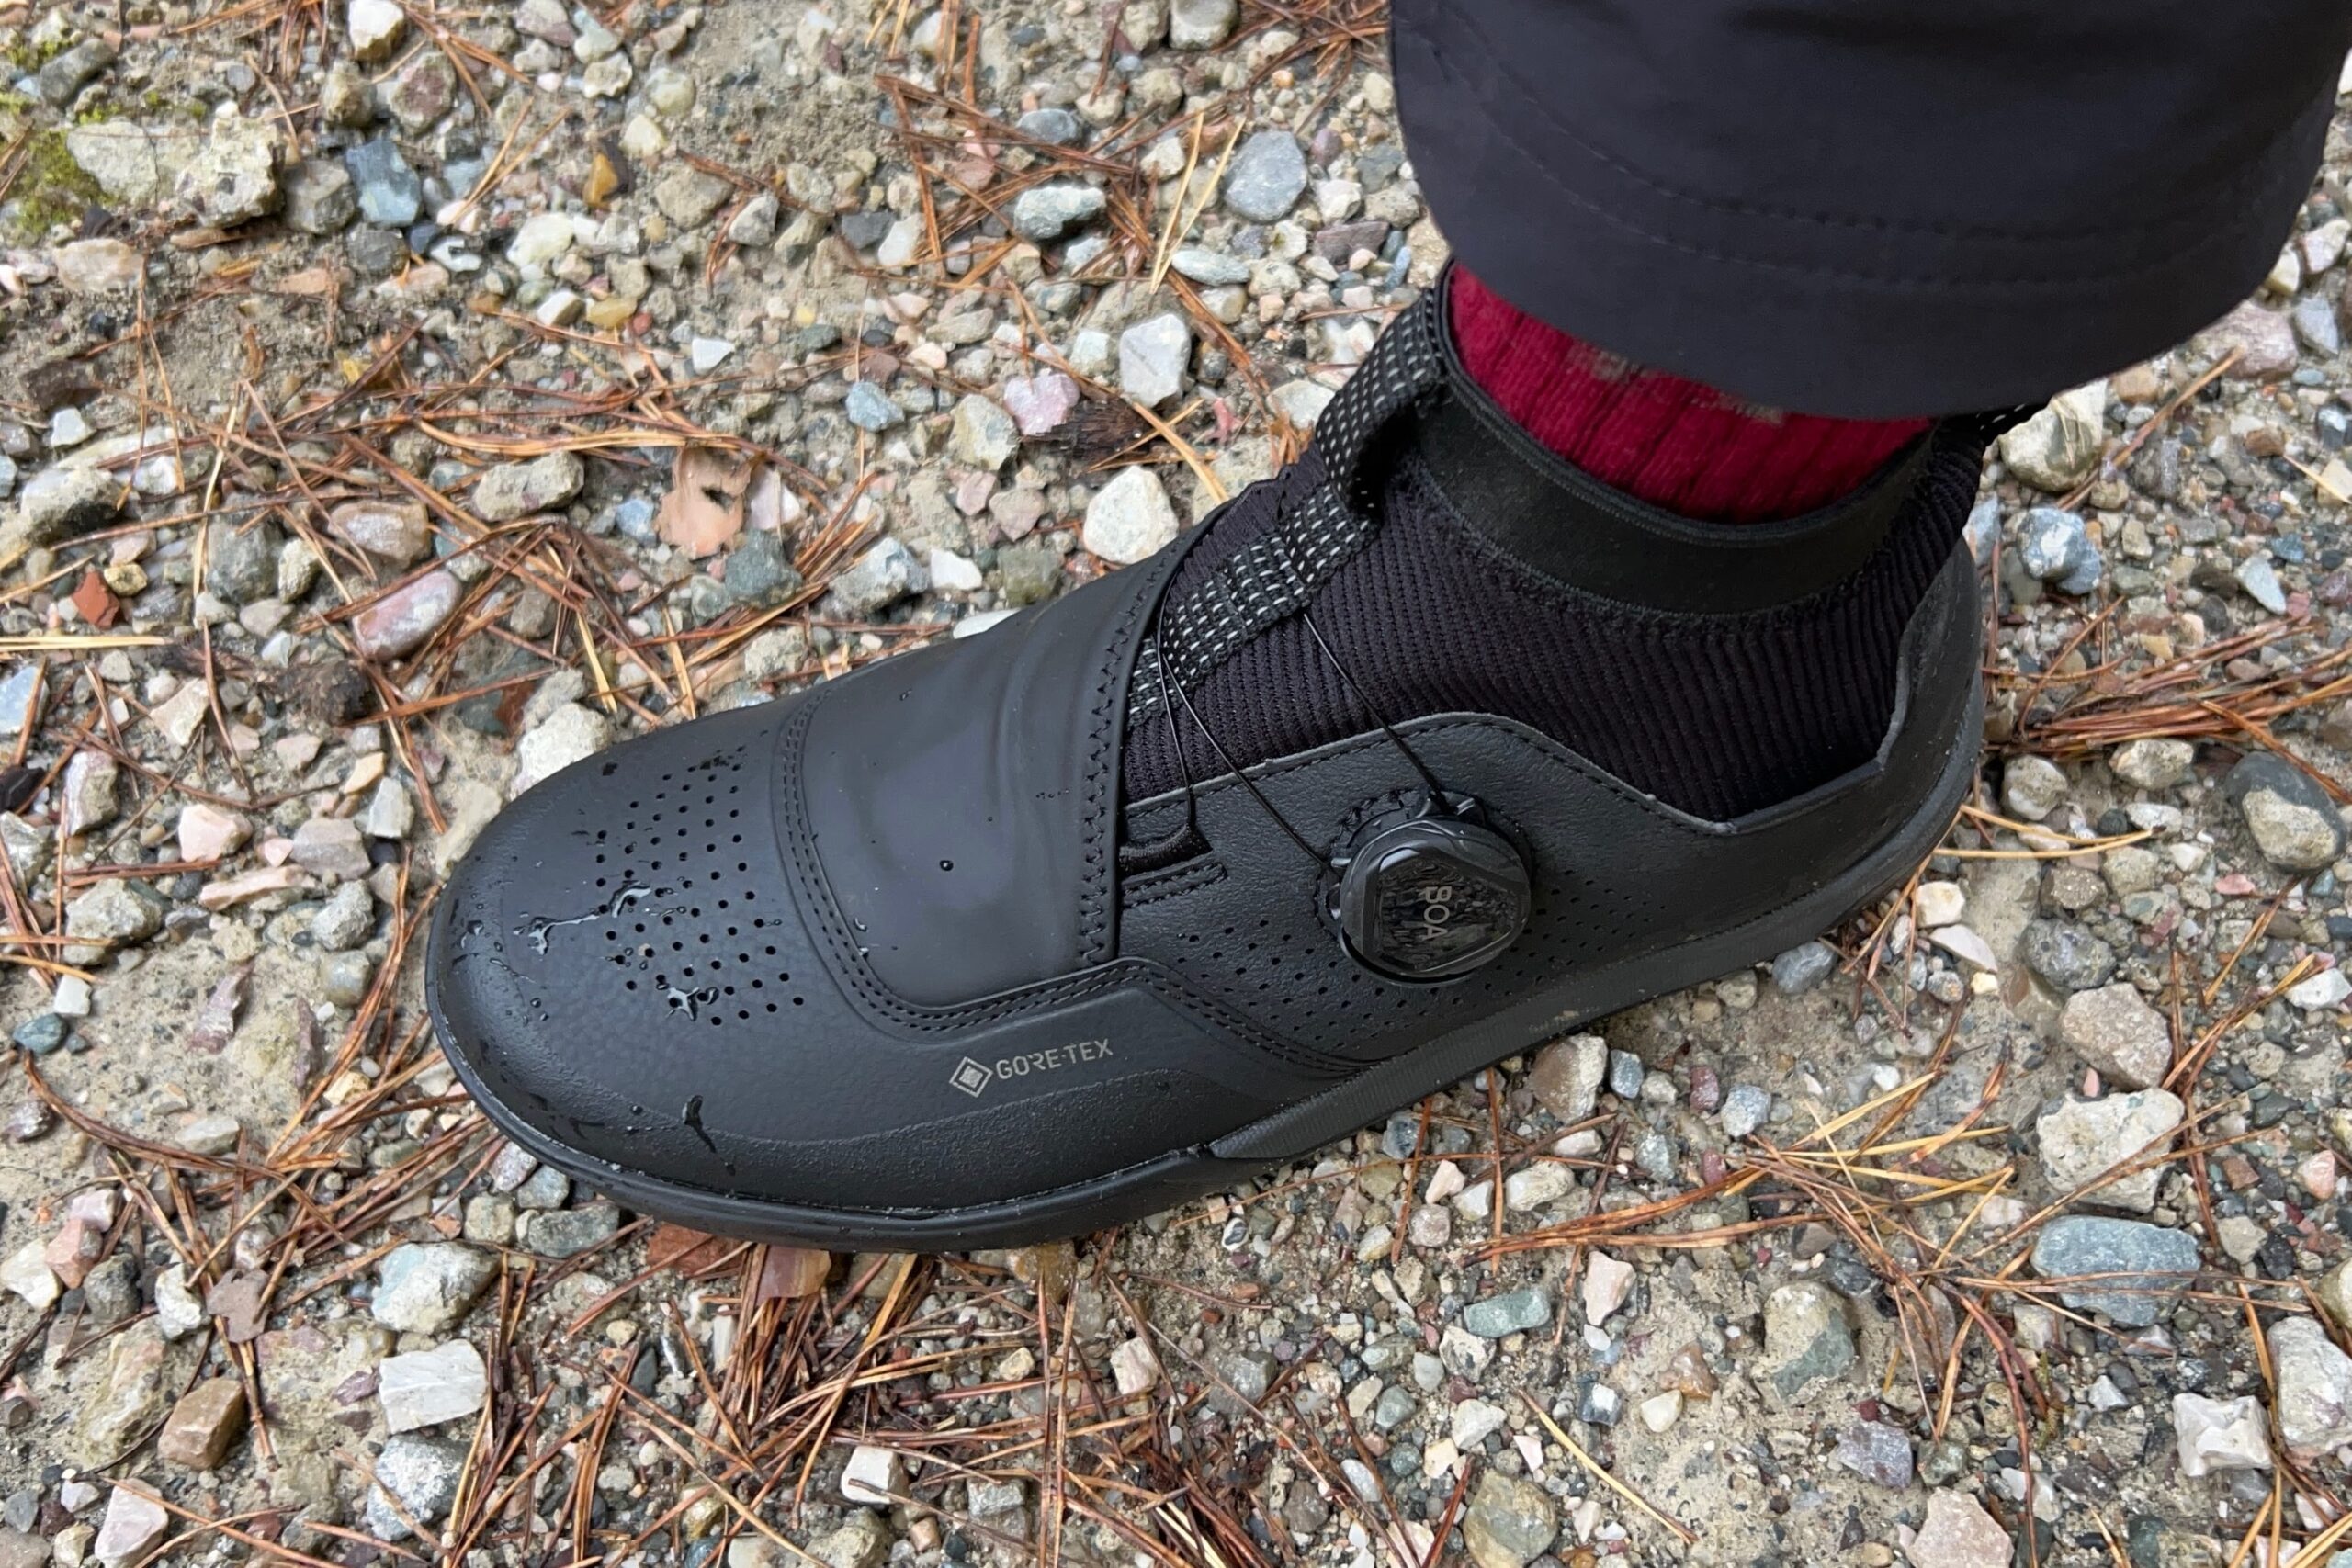 The Gore-Tex lined Shimano GF800 GTX flat pedal shoes